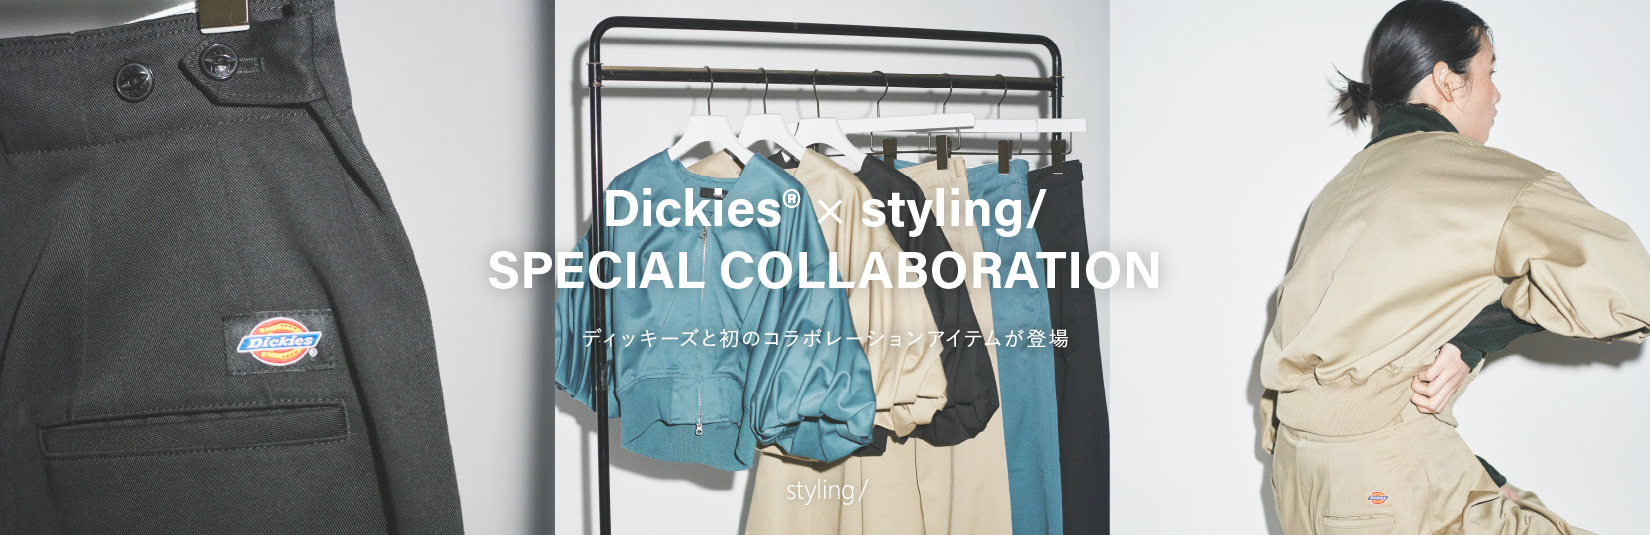 Dickies® × styling/ SPECIAL COLLABORATION